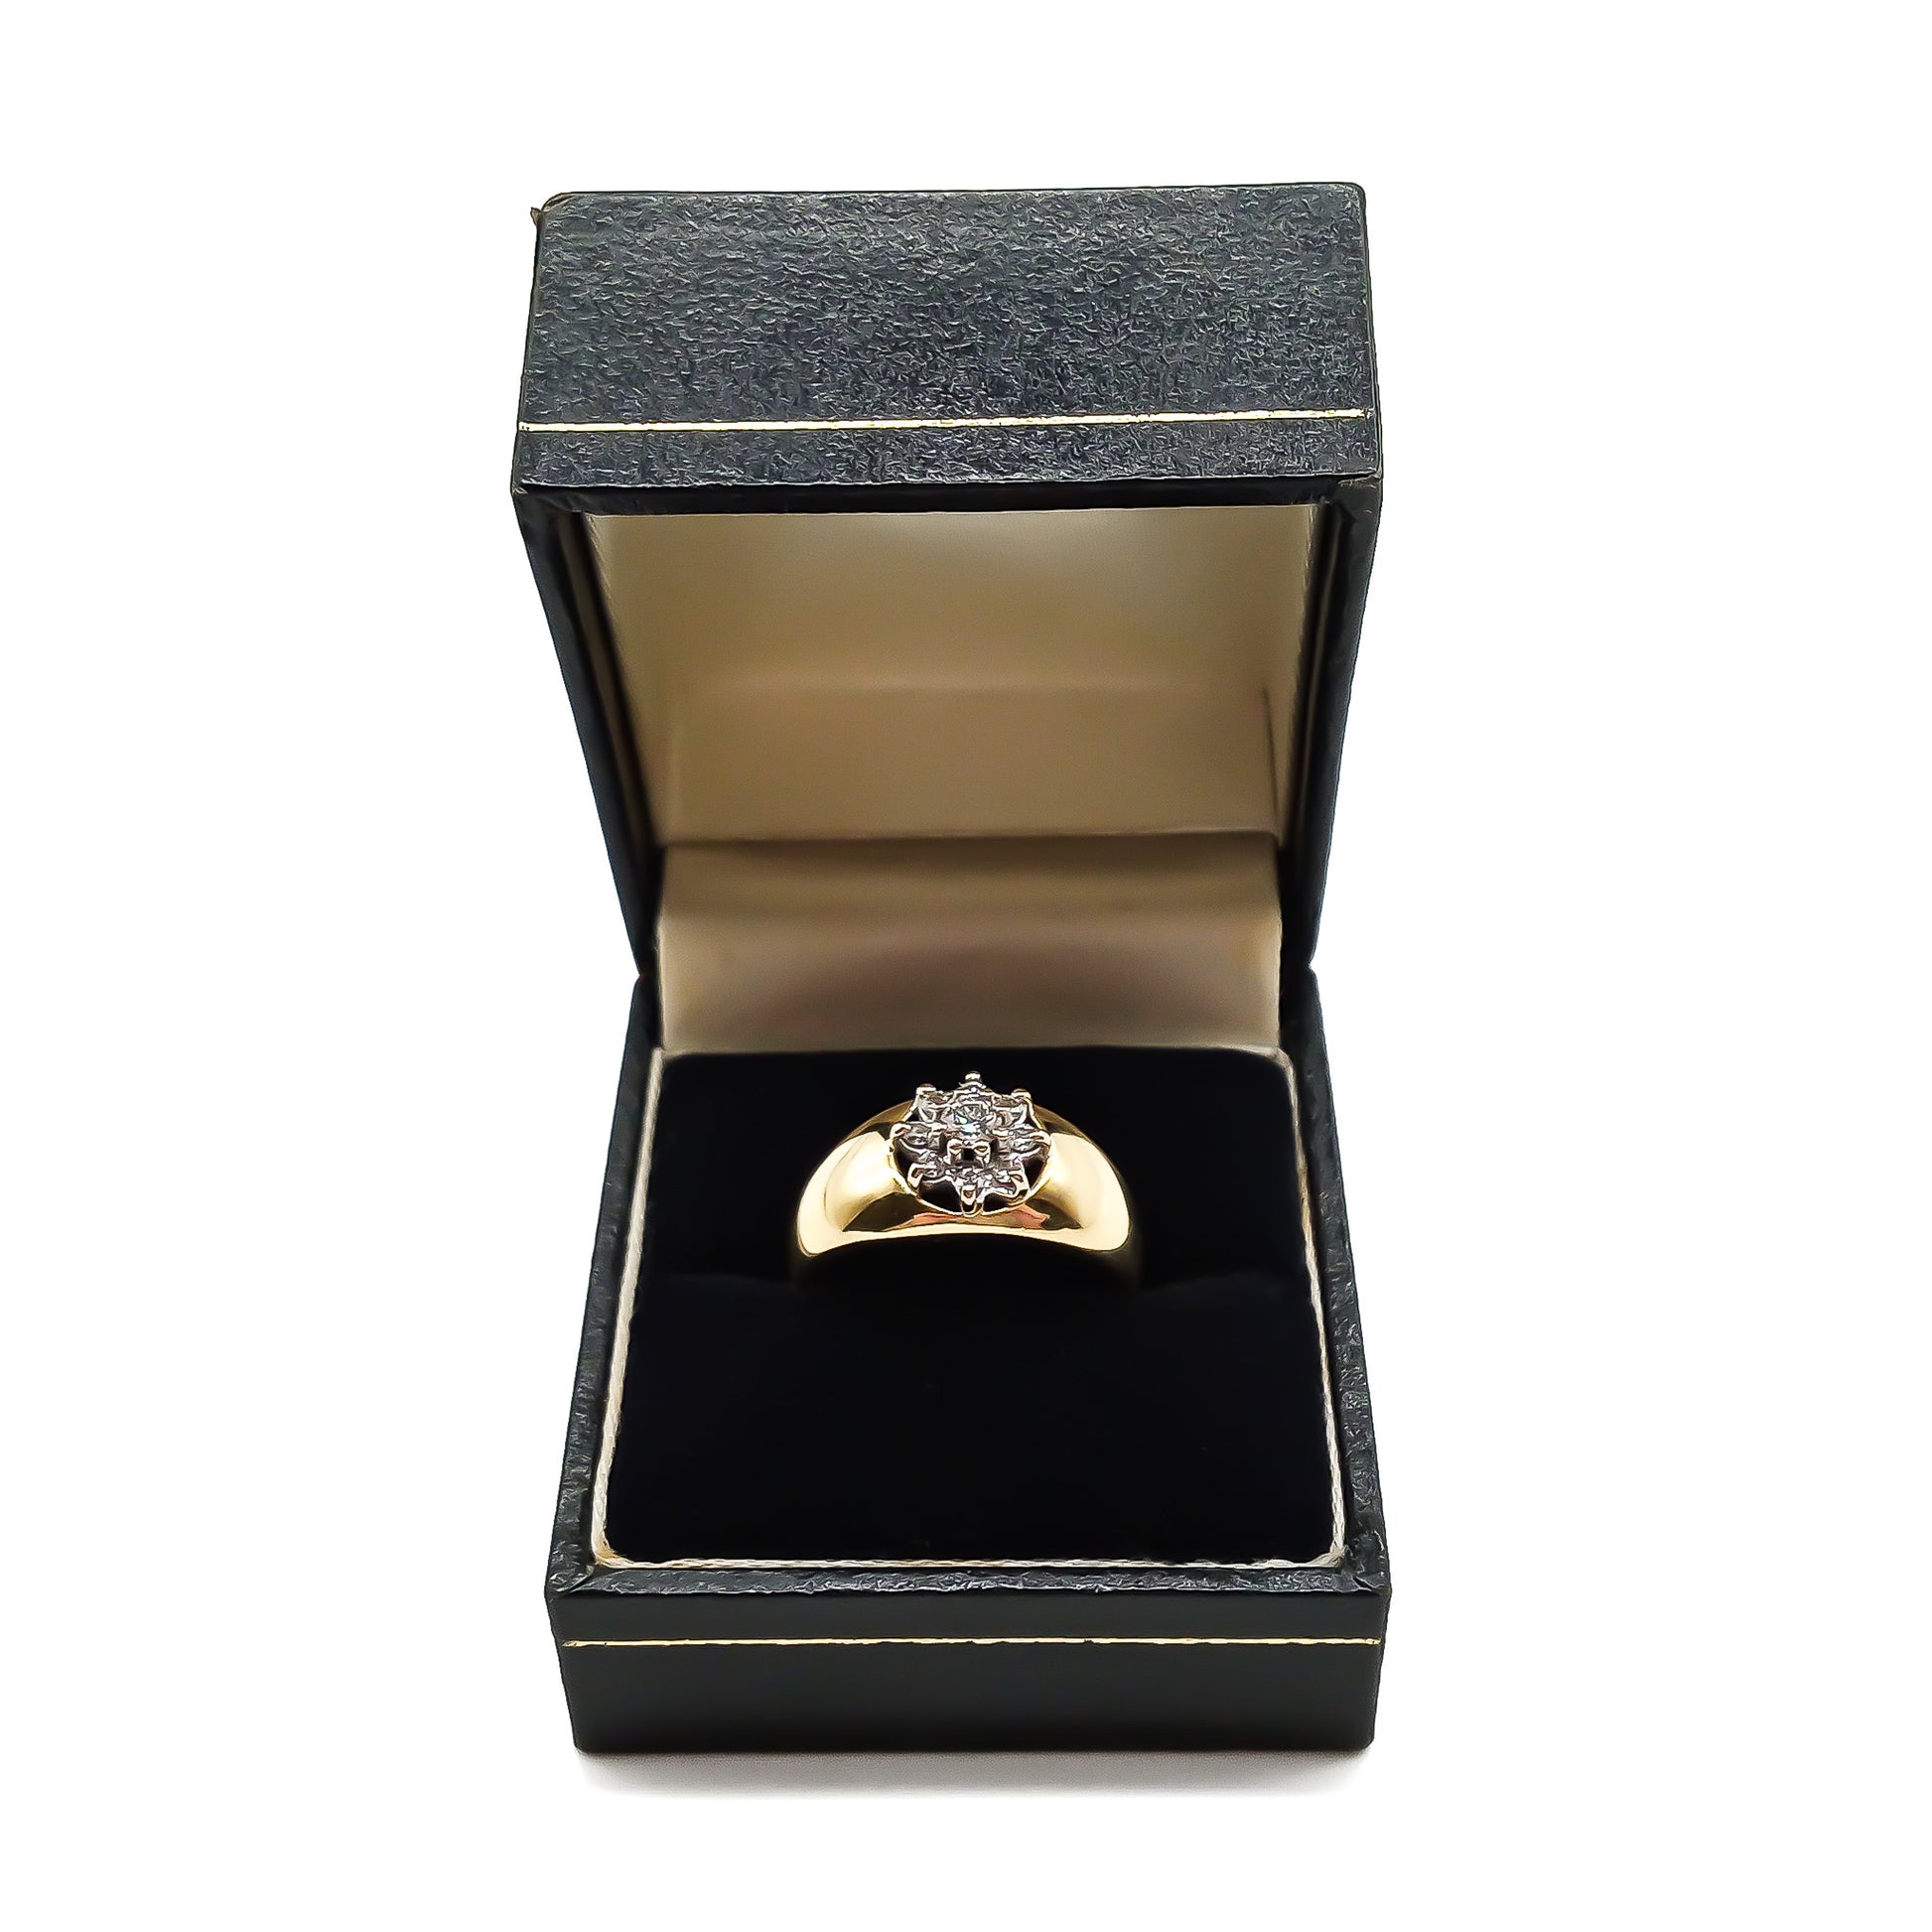 Lovely vintage 18ct yellow gold diamond ring with nine sparkling diamonds in a white gold flower setting.